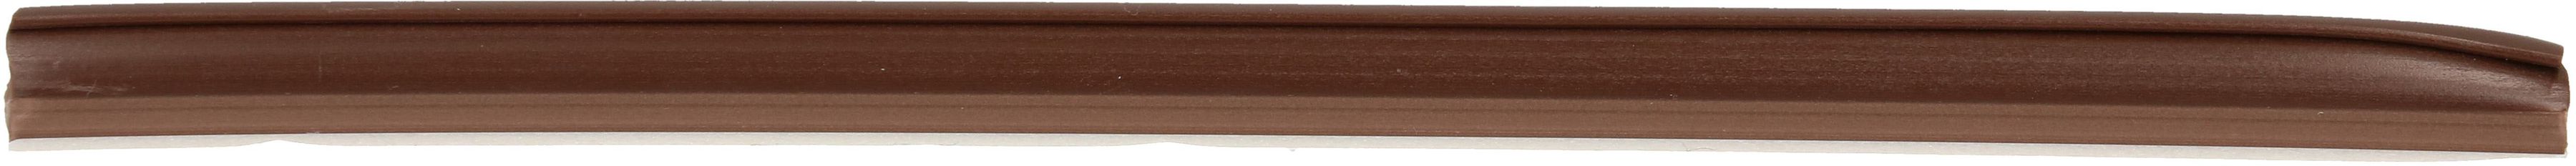 Cablefix adhesive 5x5,5mm brown